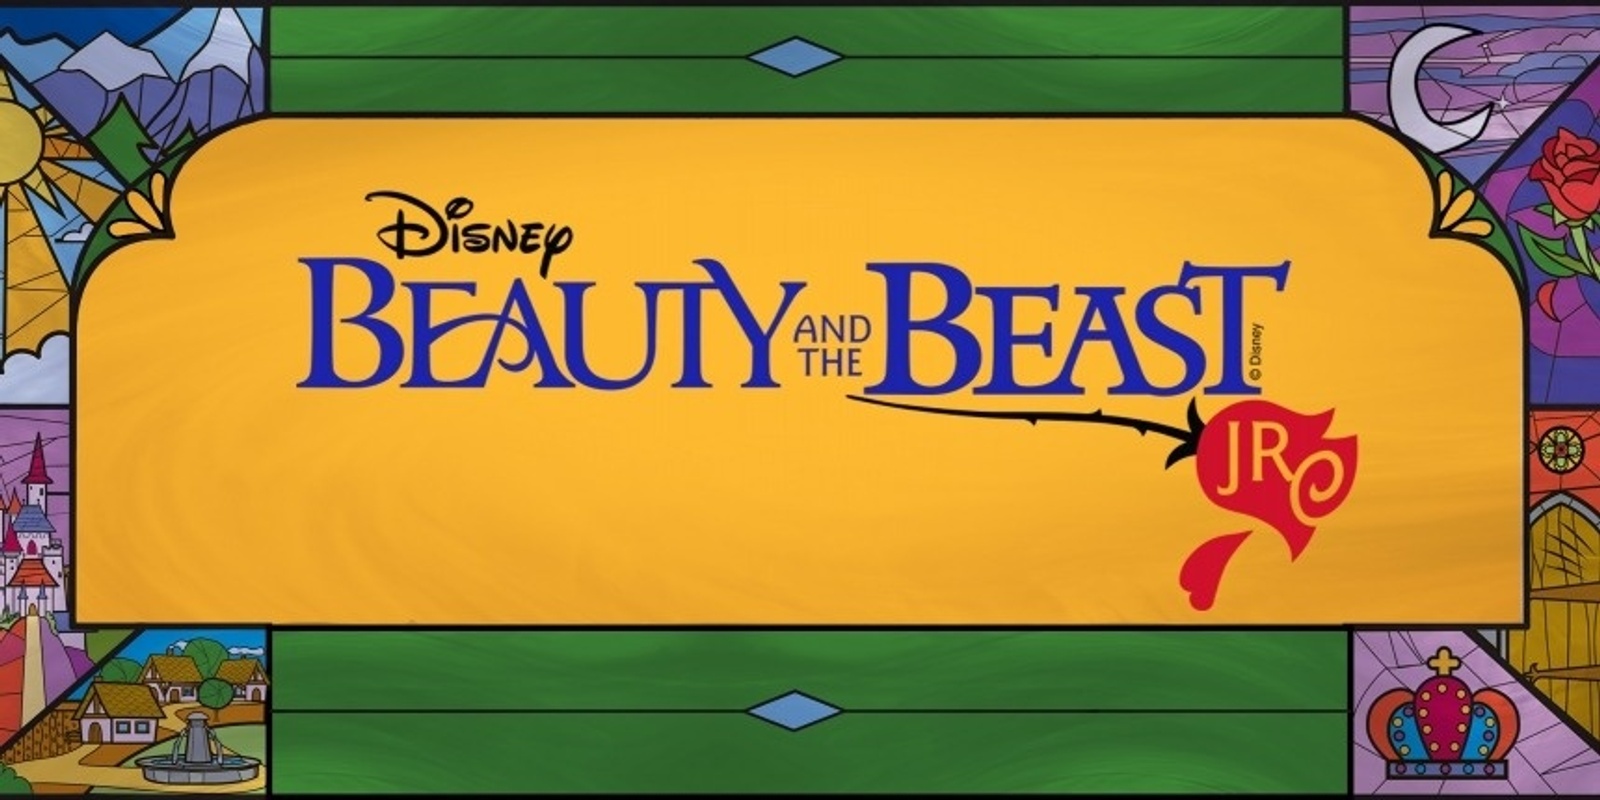 Banner image for Disney's Beauty and the Beast Jr